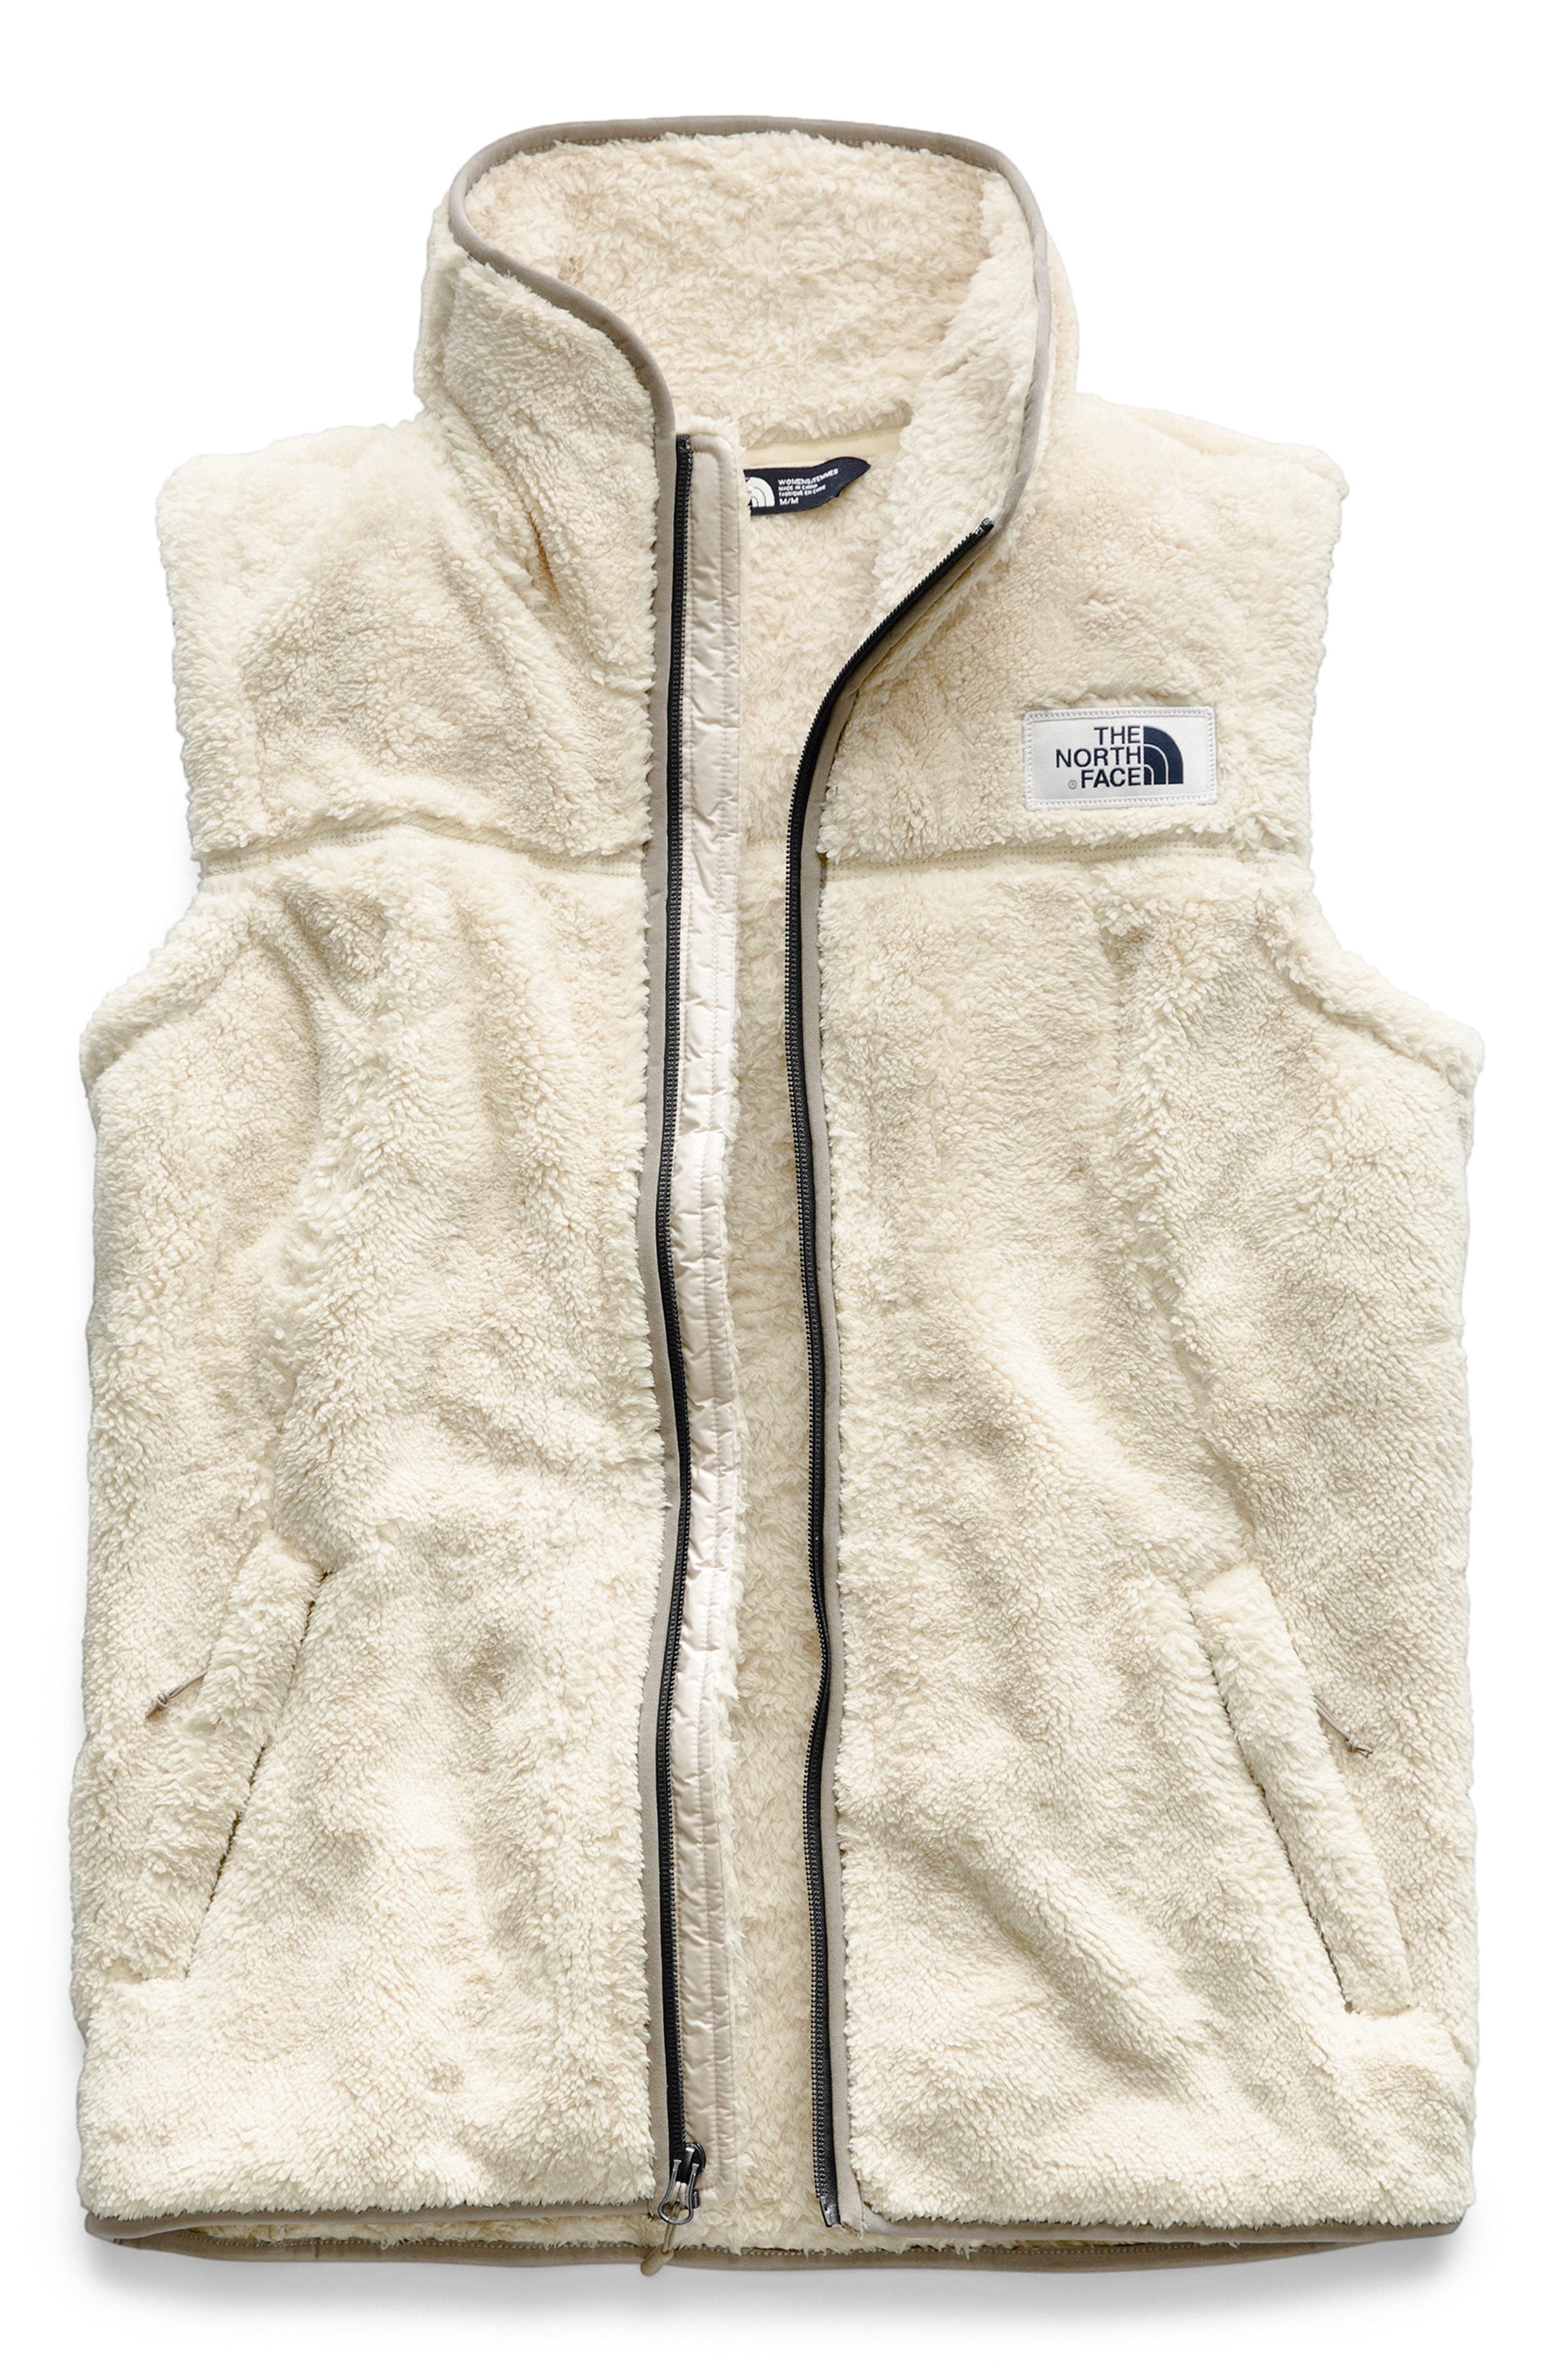 The North Face Campshire Fleece Vest, $99 Nordstrom | Lookastic